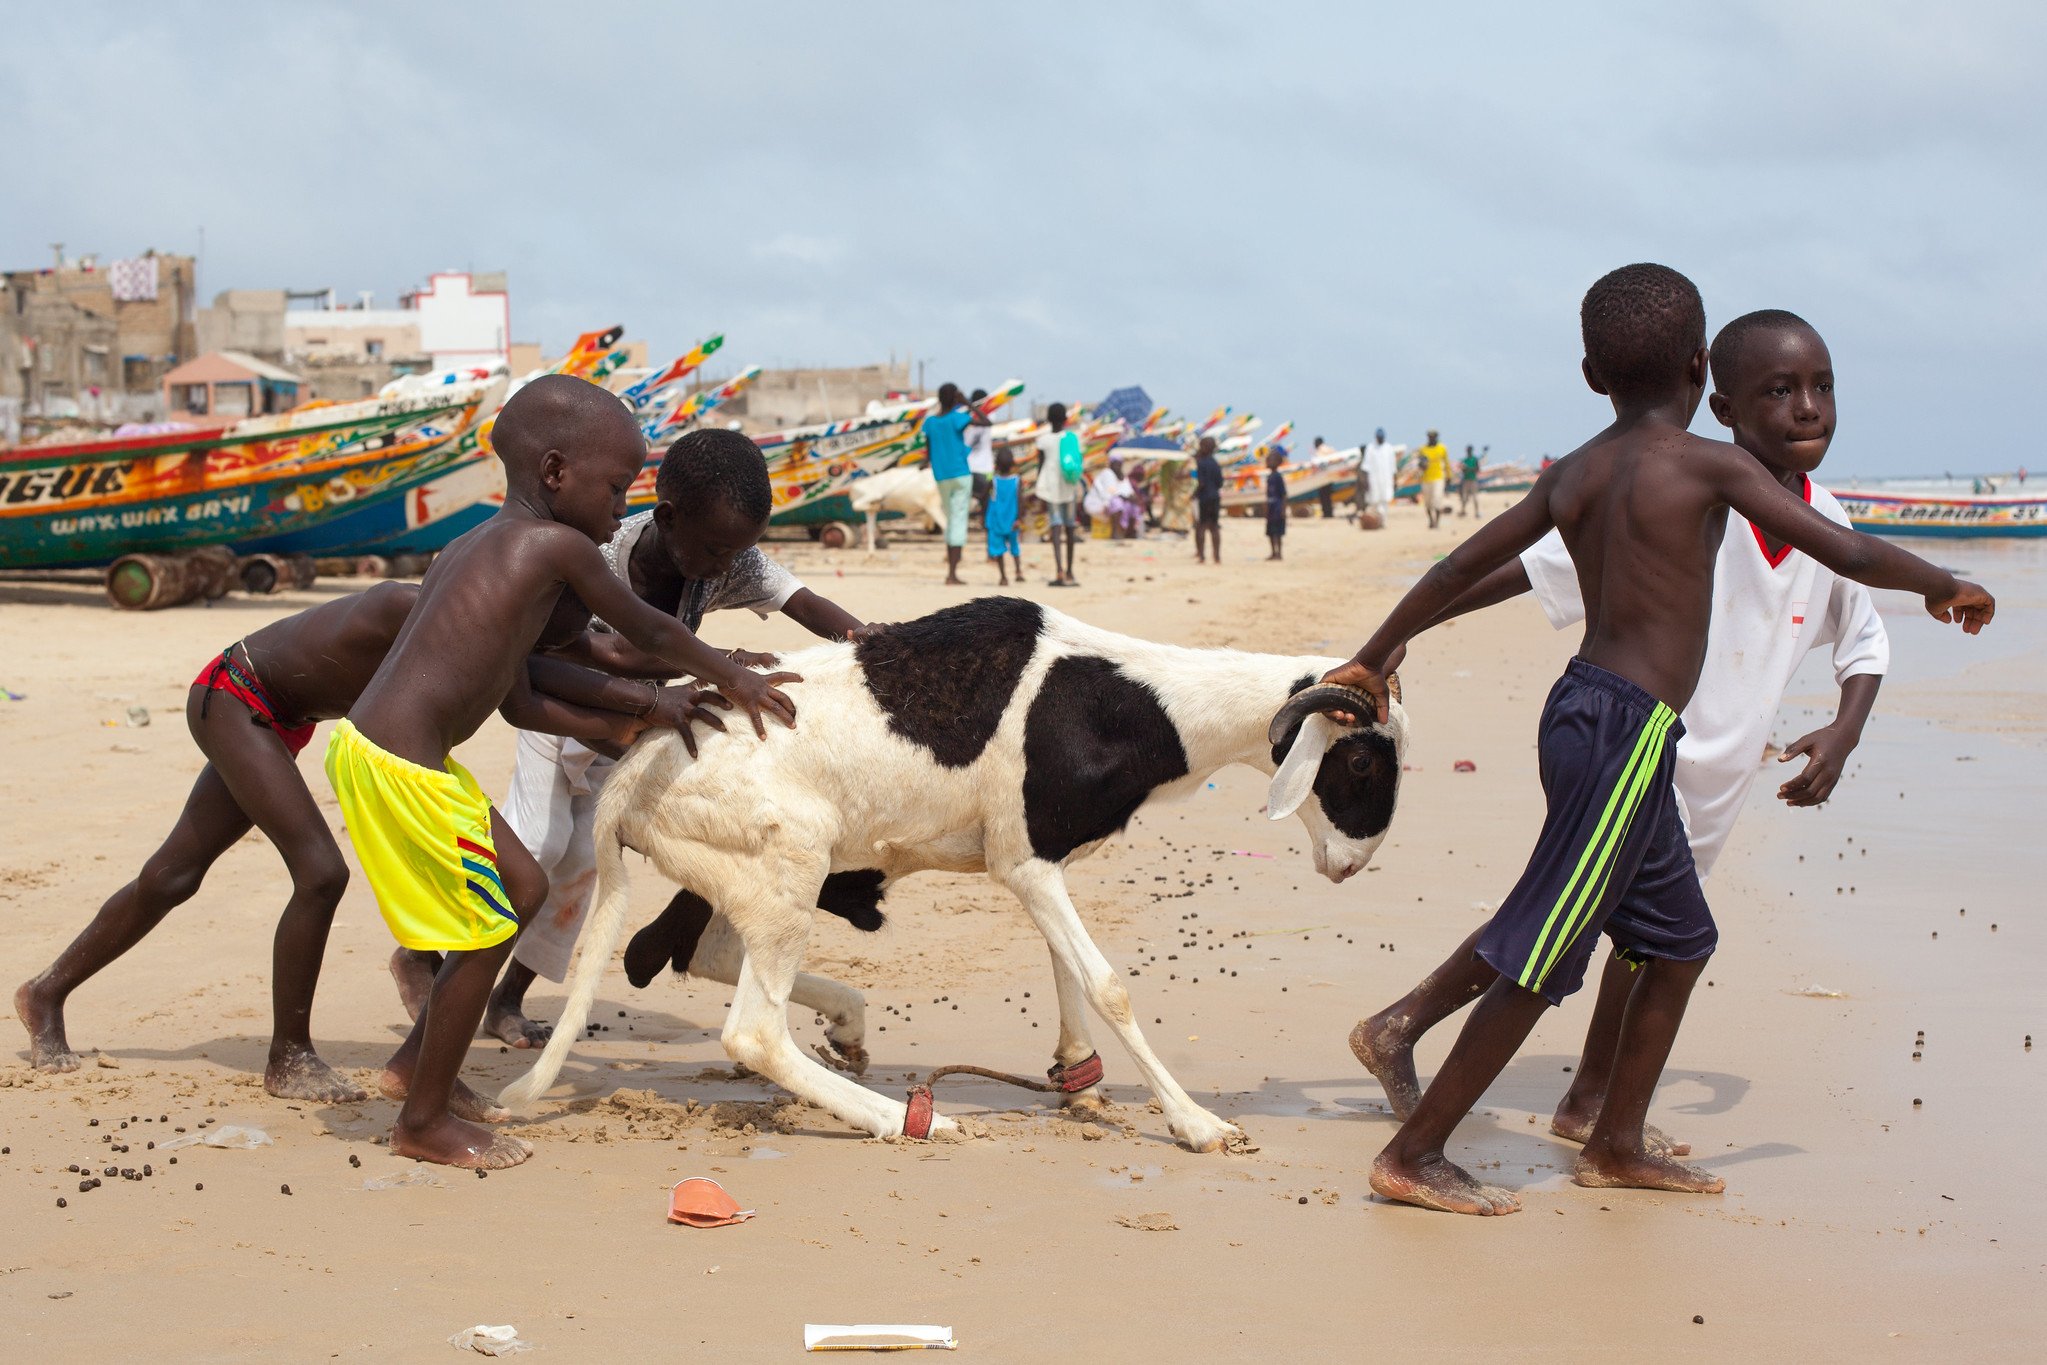 Senegal travel photography by Geraint Rowland